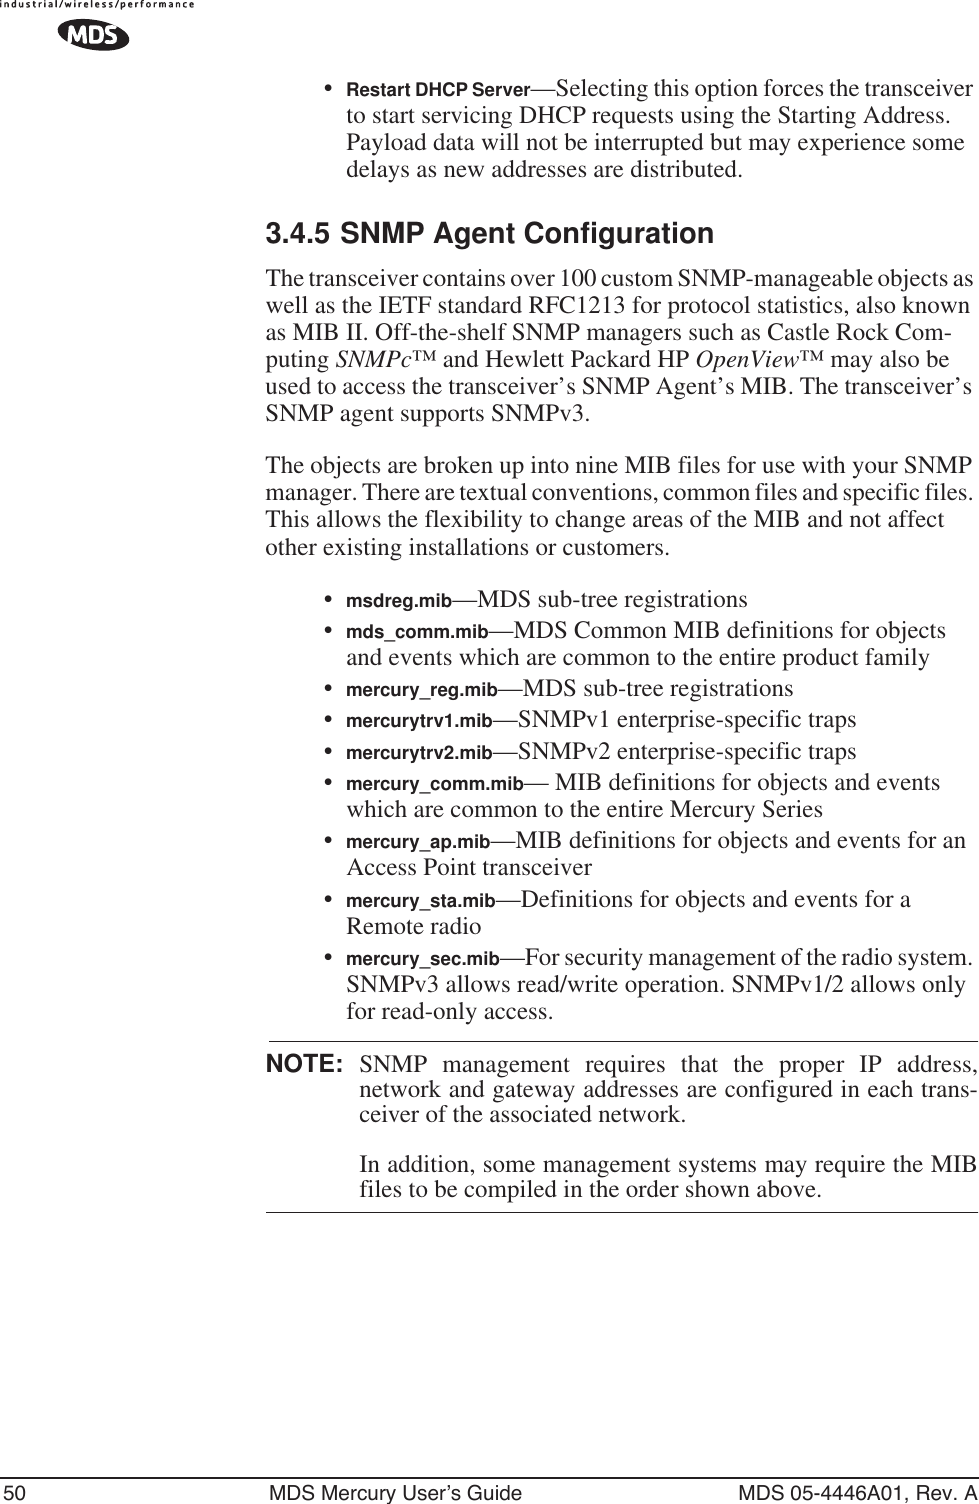 50 MDS Mercury User’s Guide MDS 05-4446A01, Rev. A•Restart DHCP Server—Selecting this option forces the transceiver to start servicing DHCP requests using the Starting Address. Payload data will not be interrupted but may experience some delays as new addresses are distributed.3.4.5 SNMP Agent ConfigurationThe transceiver contains over 100 custom SNMP-manageable objects as well as the IETF standard RFC1213 for protocol statistics, also known as MIB II. Off-the-shelf SNMP managers such as Castle Rock Com-puting SNMPc™ and Hewlett Packard HP OpenView™ may also be used to access the transceiver’s SNMP Agent’s MIB. The transceiver’s SNMP agent supports SNMPv3.The objects are broken up into nine MIB files for use with your SNMP manager. There are textual conventions, common files and specific files. This allows the flexibility to change areas of the MIB and not affect other existing installations or customers.•msdreg.mib—MDS sub-tree registrations•mds_comm.mib—MDS Common MIB definitions for objects and events which are common to the entire product family•mercury_reg.mib—MDS sub-tree registrations•mercurytrv1.mib—SNMPv1 enterprise-specific traps•mercurytrv2.mib—SNMPv2 enterprise-specific traps•mercury_comm.mib— MIB definitions for objects and events which are common to the entire Mercury Series•mercury_ap.mib—MIB definitions for objects and events for an Access Point transceiver•mercury_sta.mib—Definitions for objects and events for a Remote radio•mercury_sec.mib—For security management of the radio system. SNMPv3 allows read/write operation. SNMPv1/2 allows only for read-only access.NOTE: SNMP management requires that the proper IP address,network and gateway addresses are configured in each trans-ceiver of the associated network. In addition, some management systems may require the MIBfiles to be compiled in the order shown above.